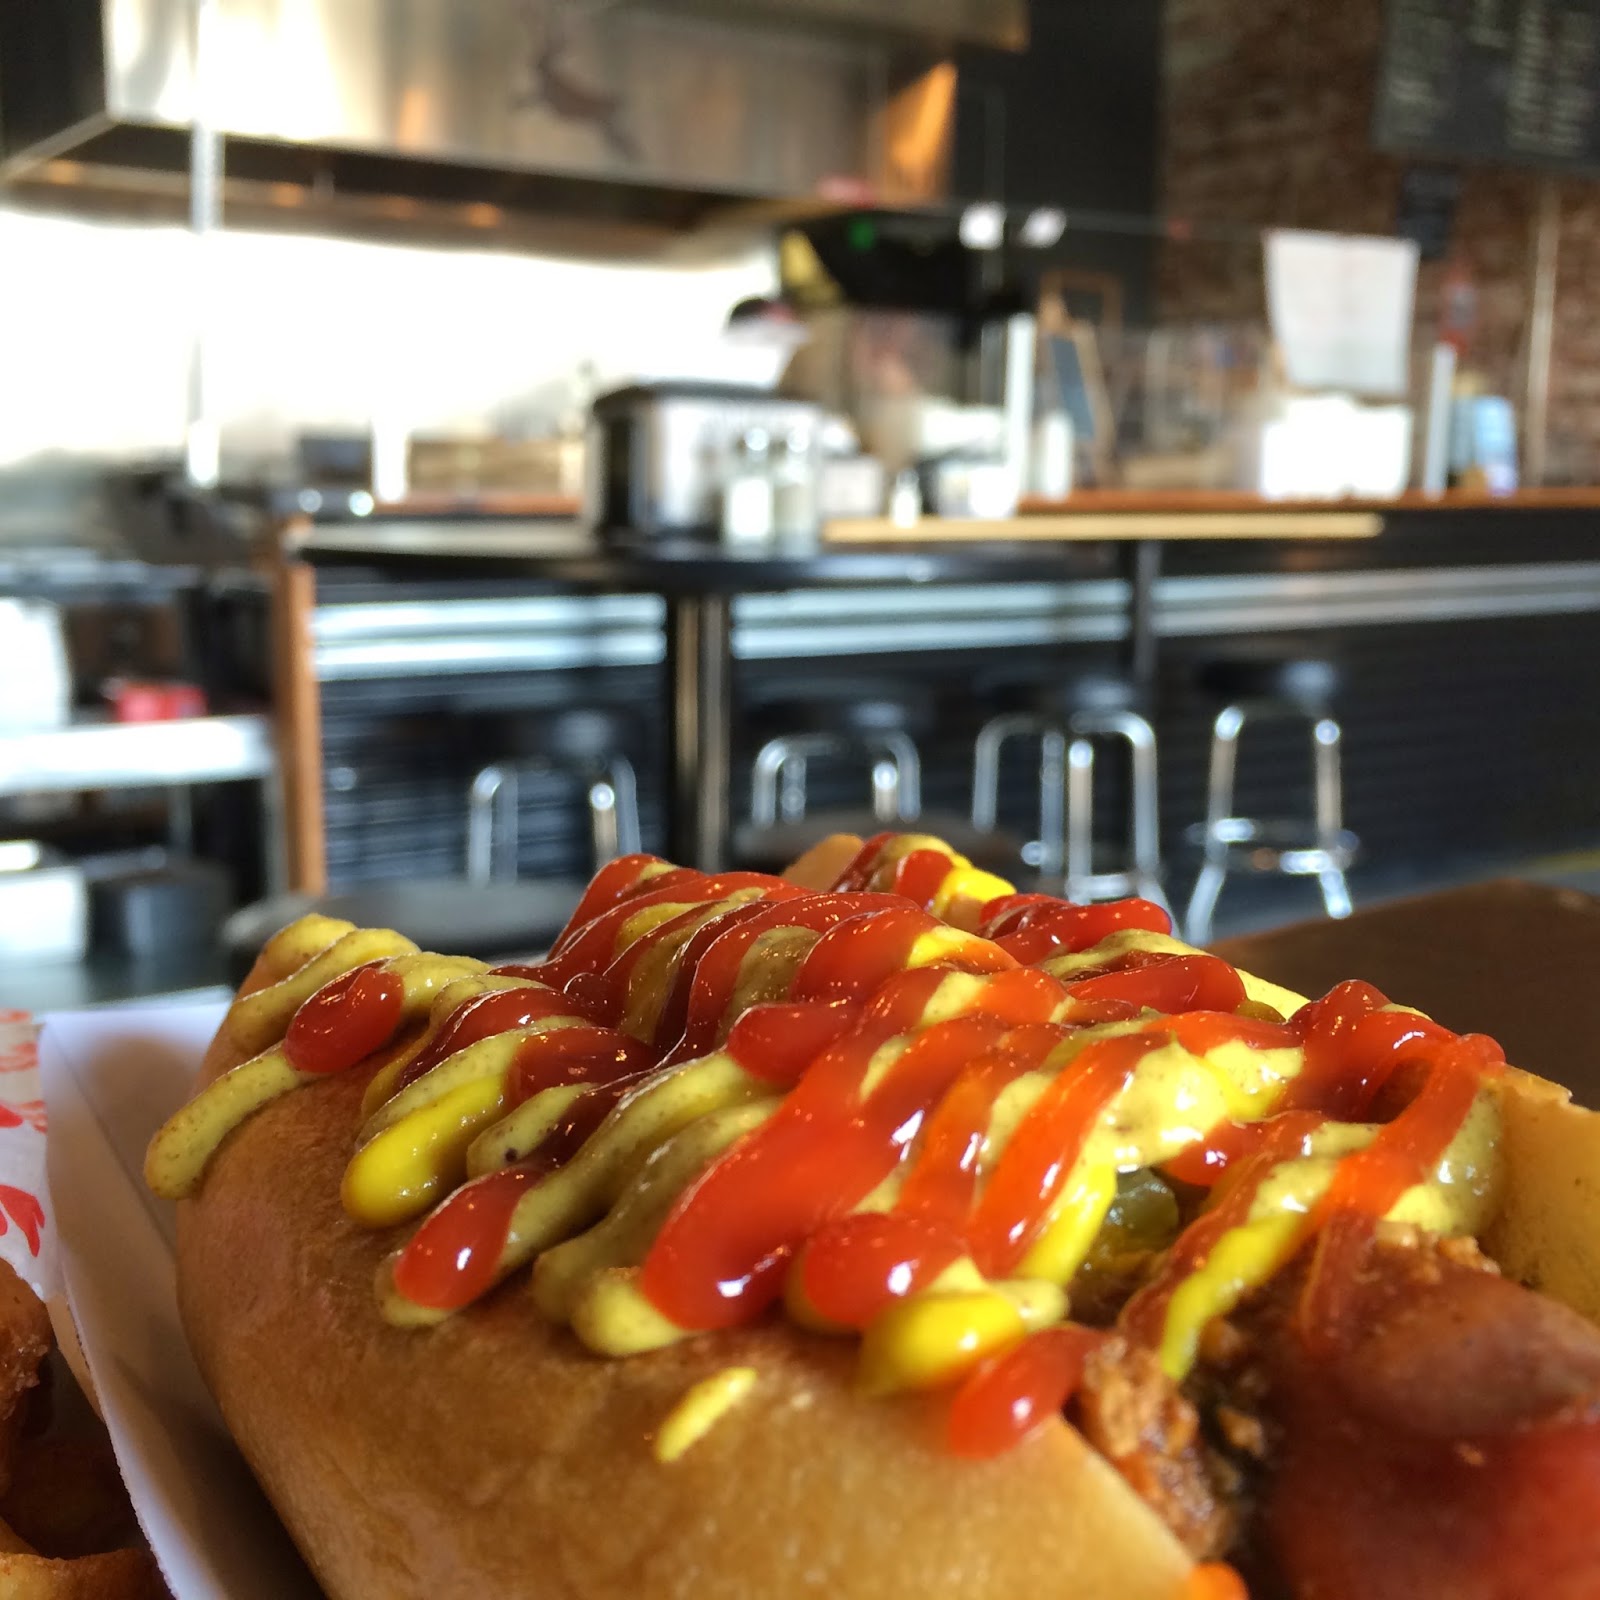 Beef Frank topped with Dill Pickle Relish, Chili, and the most beautiful array of Ketchup and Mustard you've ever seen